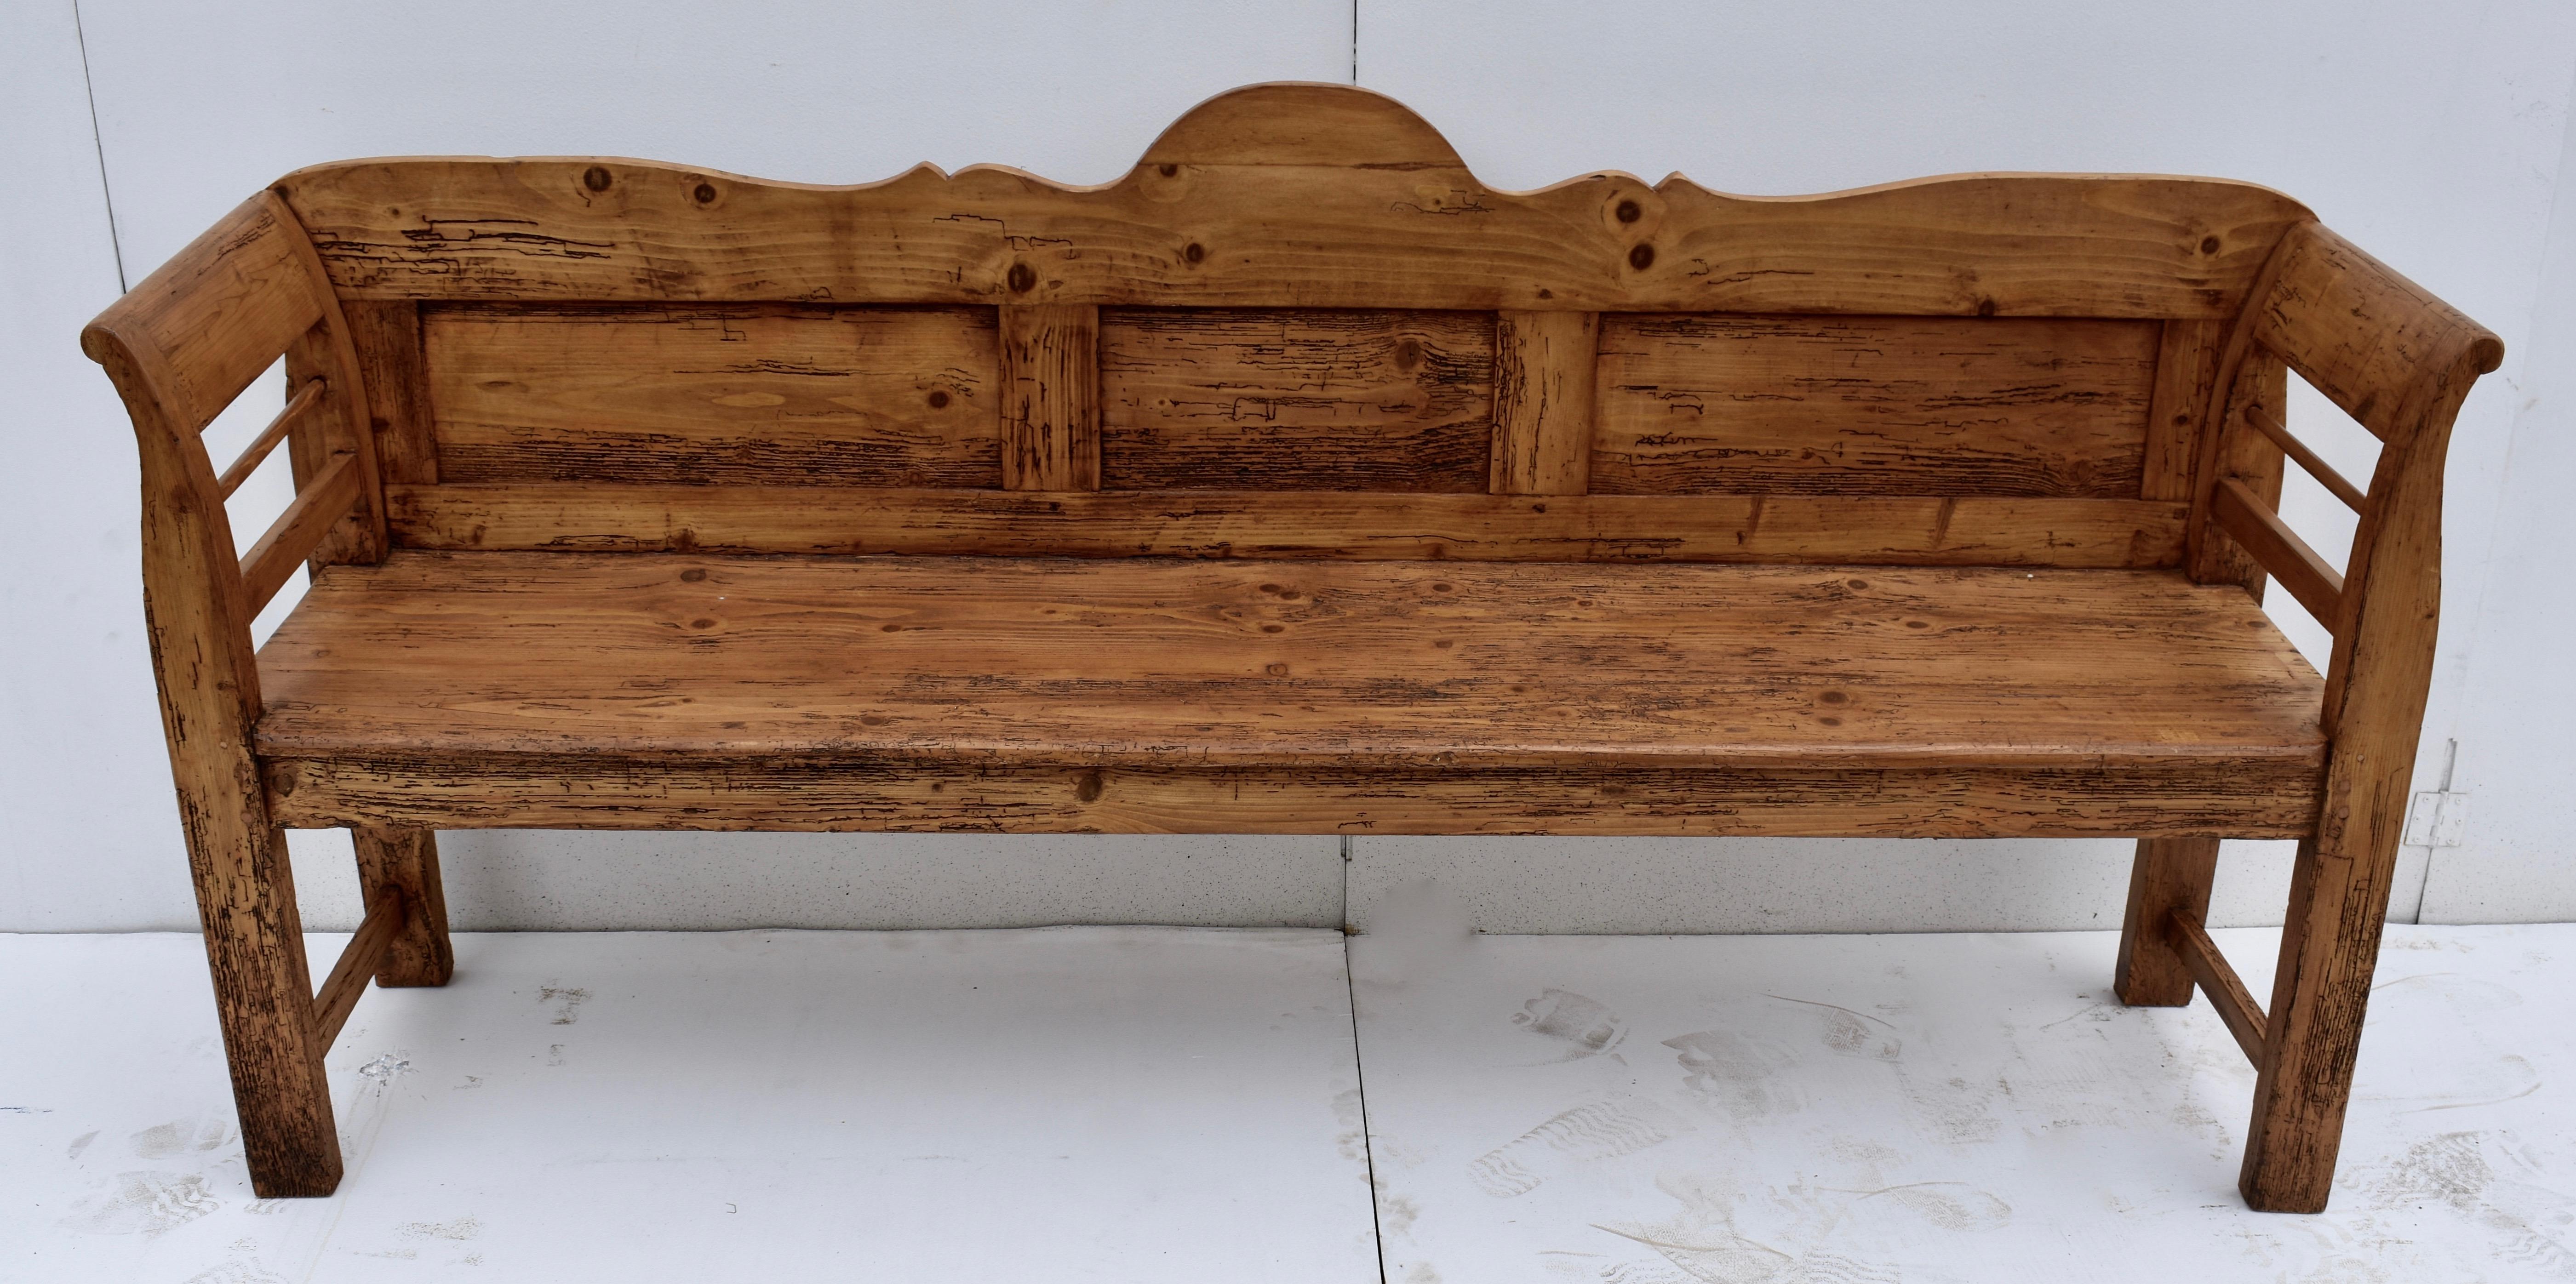 This long, low bench or settle is the epitome of rustic charm. The arched and scalloped top rail sits above three flat panels while the scrolled arms frame a horizontal spindle and stretcher, this latter repeated low in the leg. The deep seat is